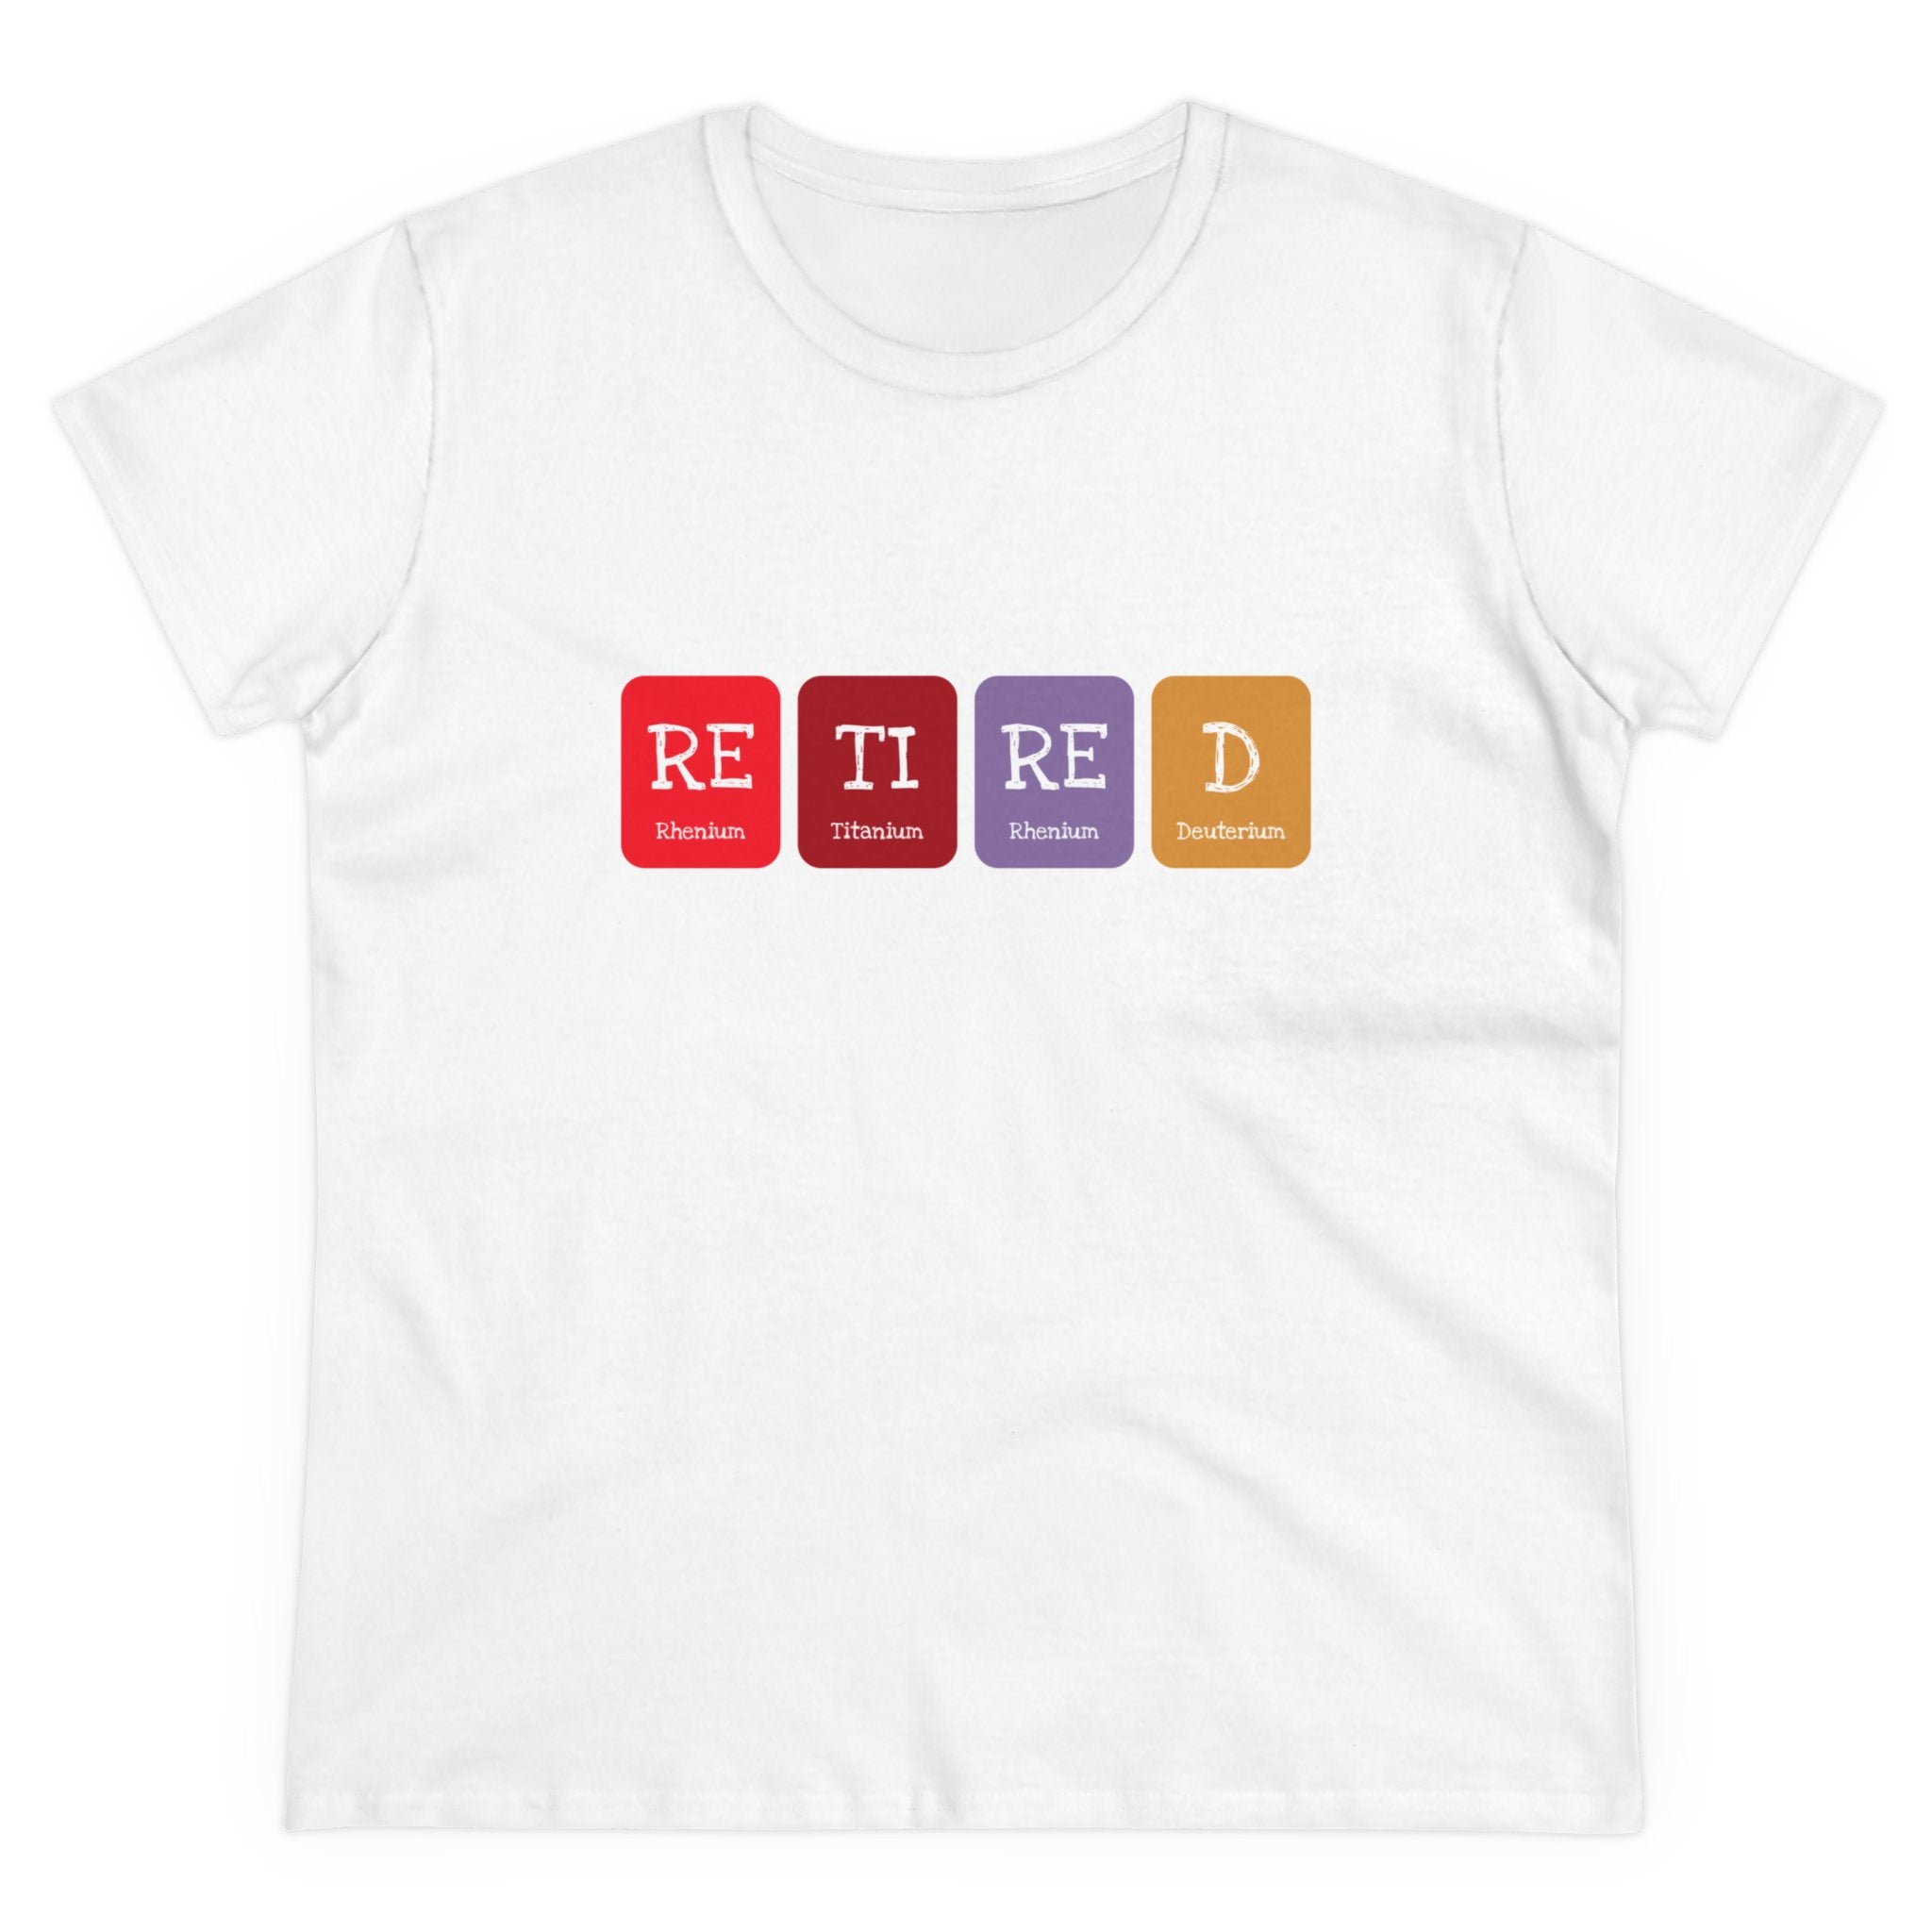 Retired - Women's Tee with "RETIRED" spelled out using Scrabble tile graphics in red, purple, and orange. Each letter has corresponding Scrabble tile values on the bottom for a touch of classic style and comfort.